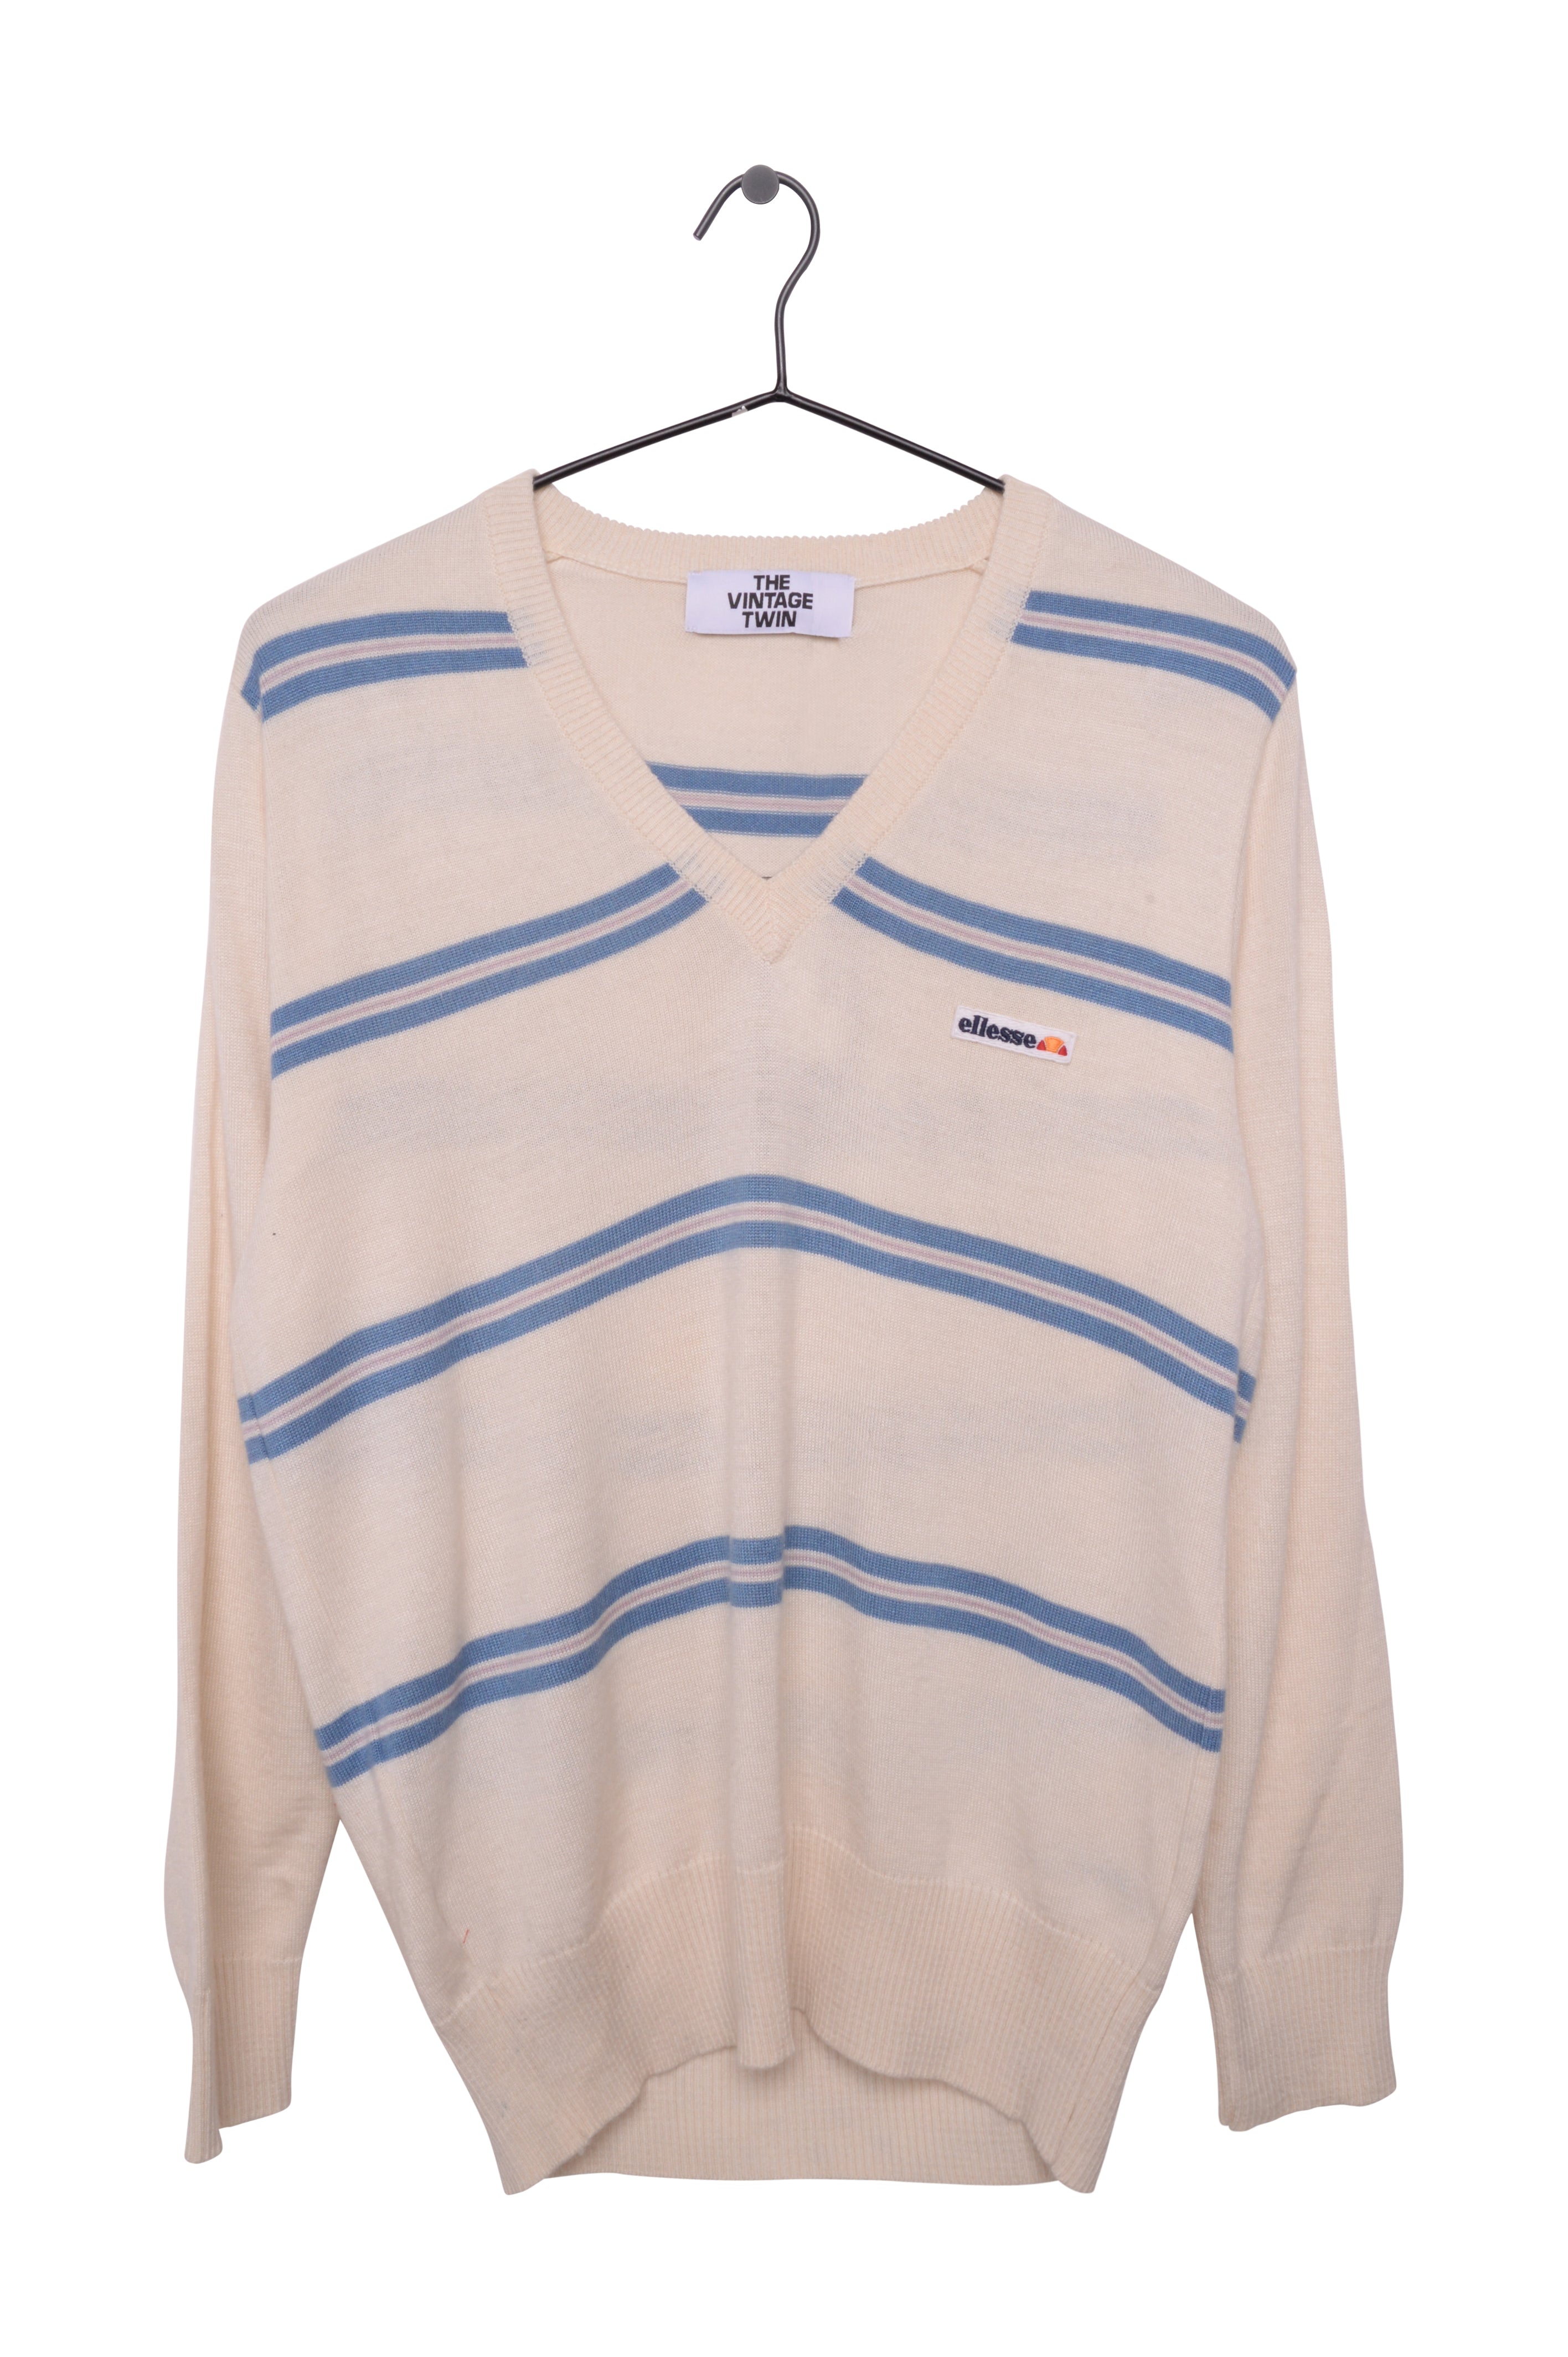 Ellesse Sweater Shipping The Vintage Twin